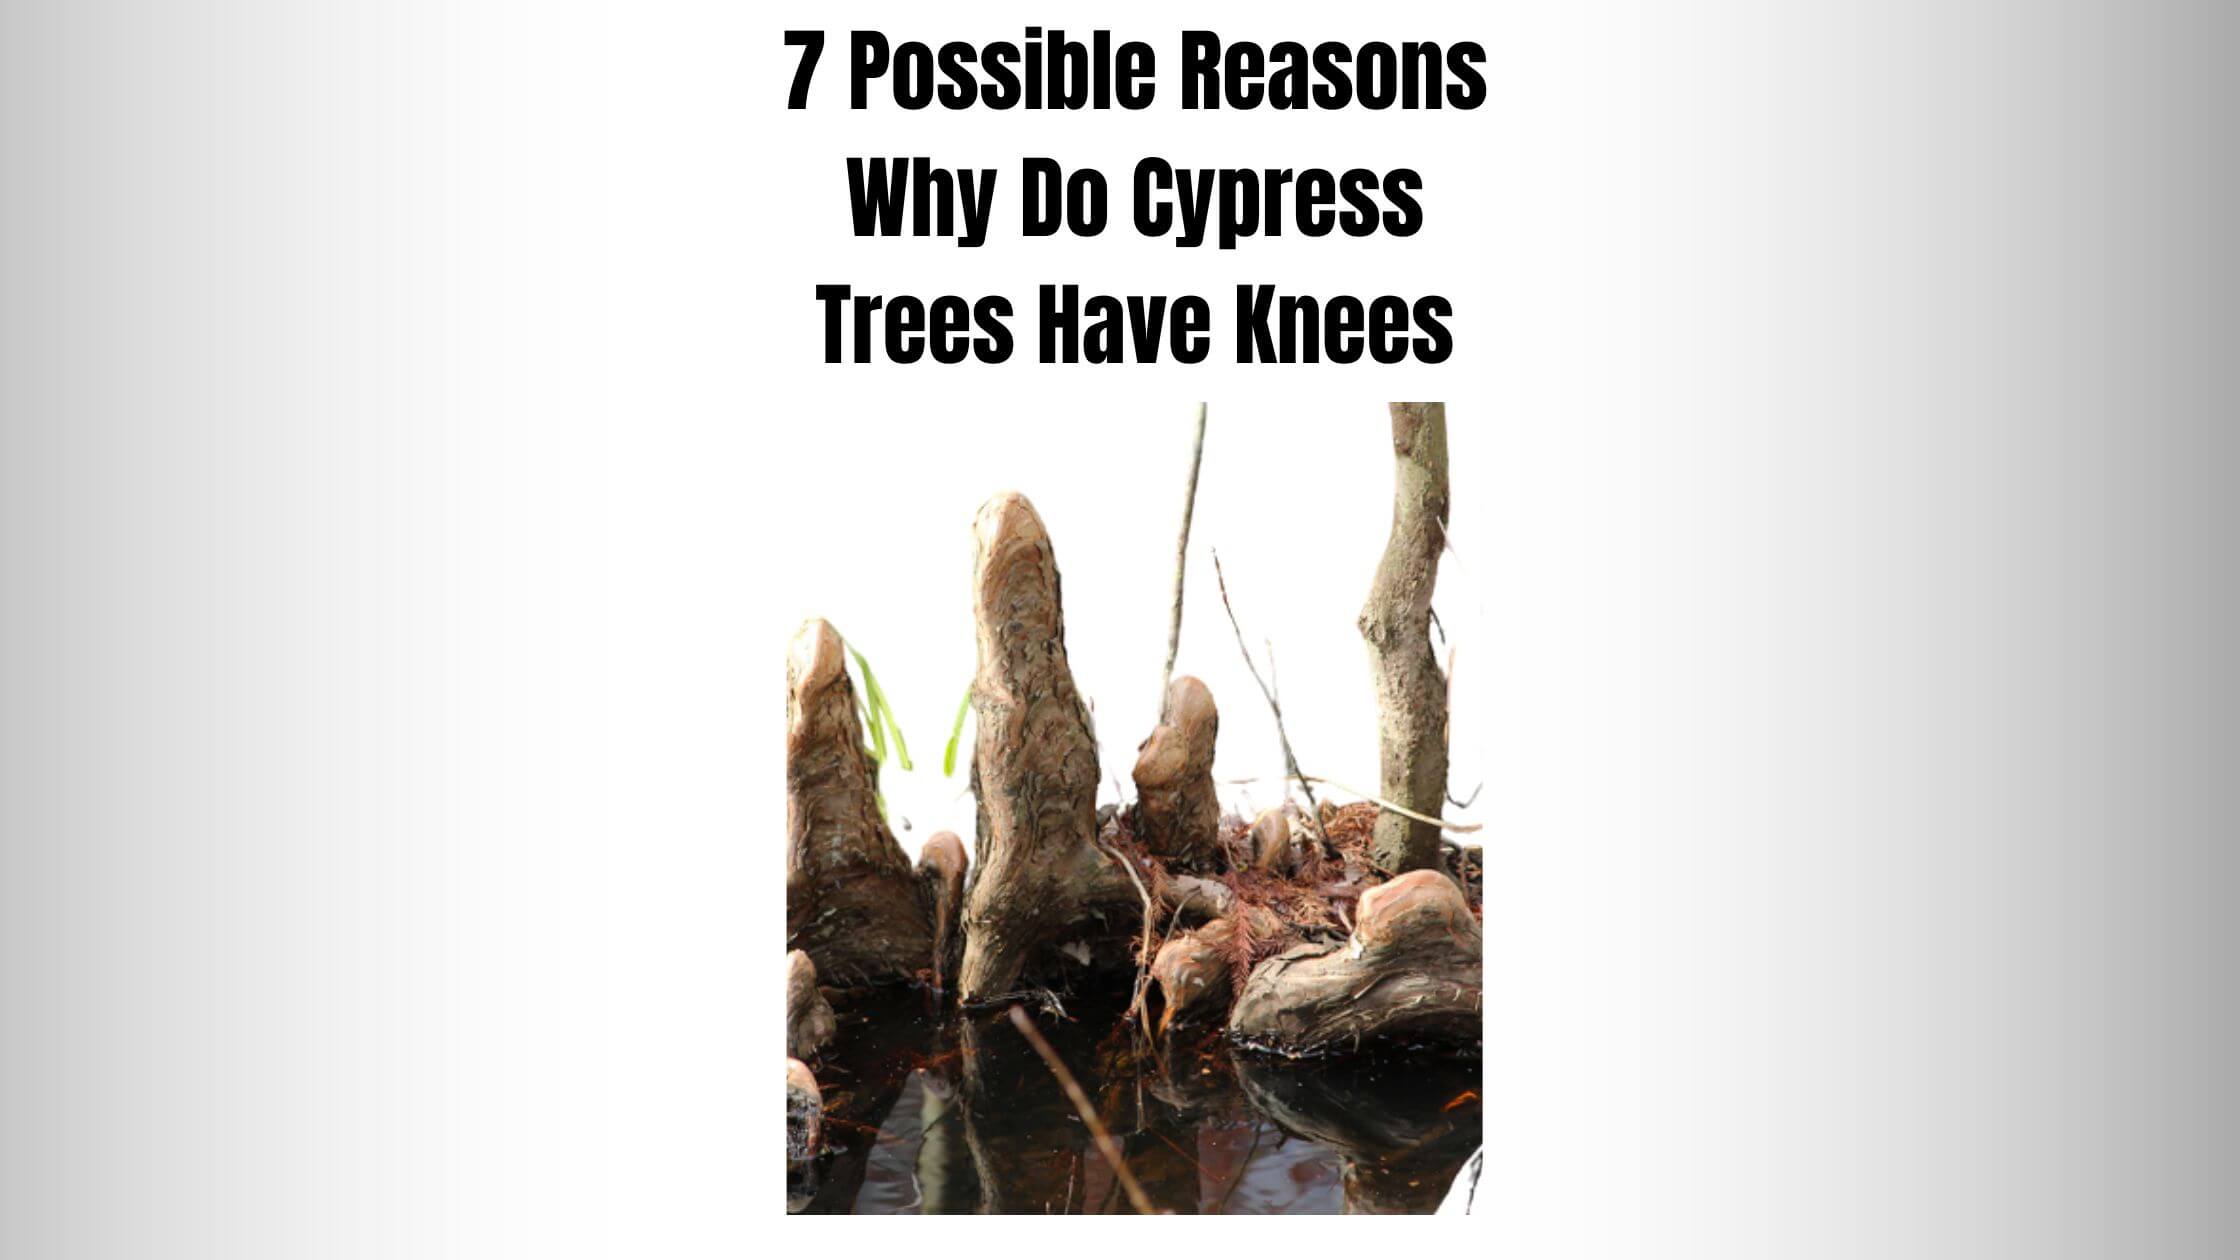 7 Possible Reasons Why Do Cypress Trees Have Knees